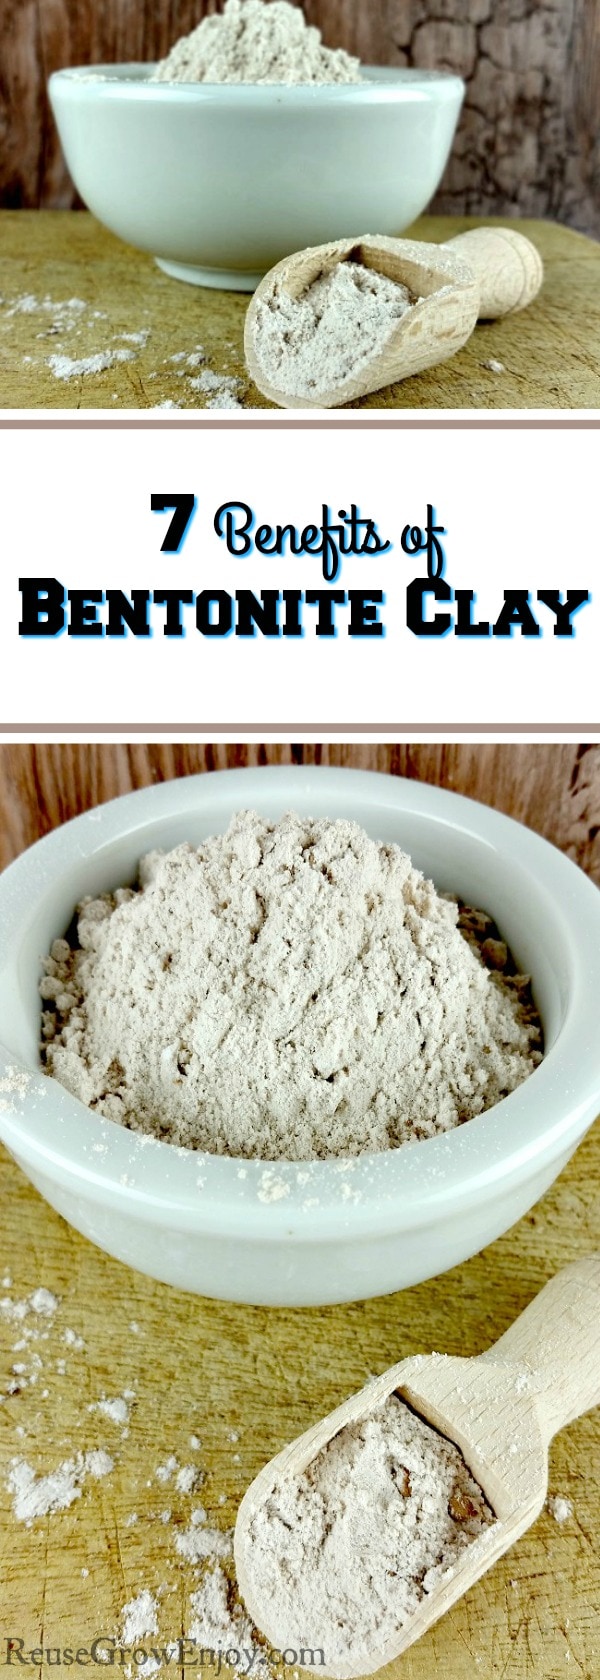 Bentonite Clay is considered a healing clay and healing clays have fallen out of popularity over recent years. I am going to show you 7 benefits of Bentonite Clay!